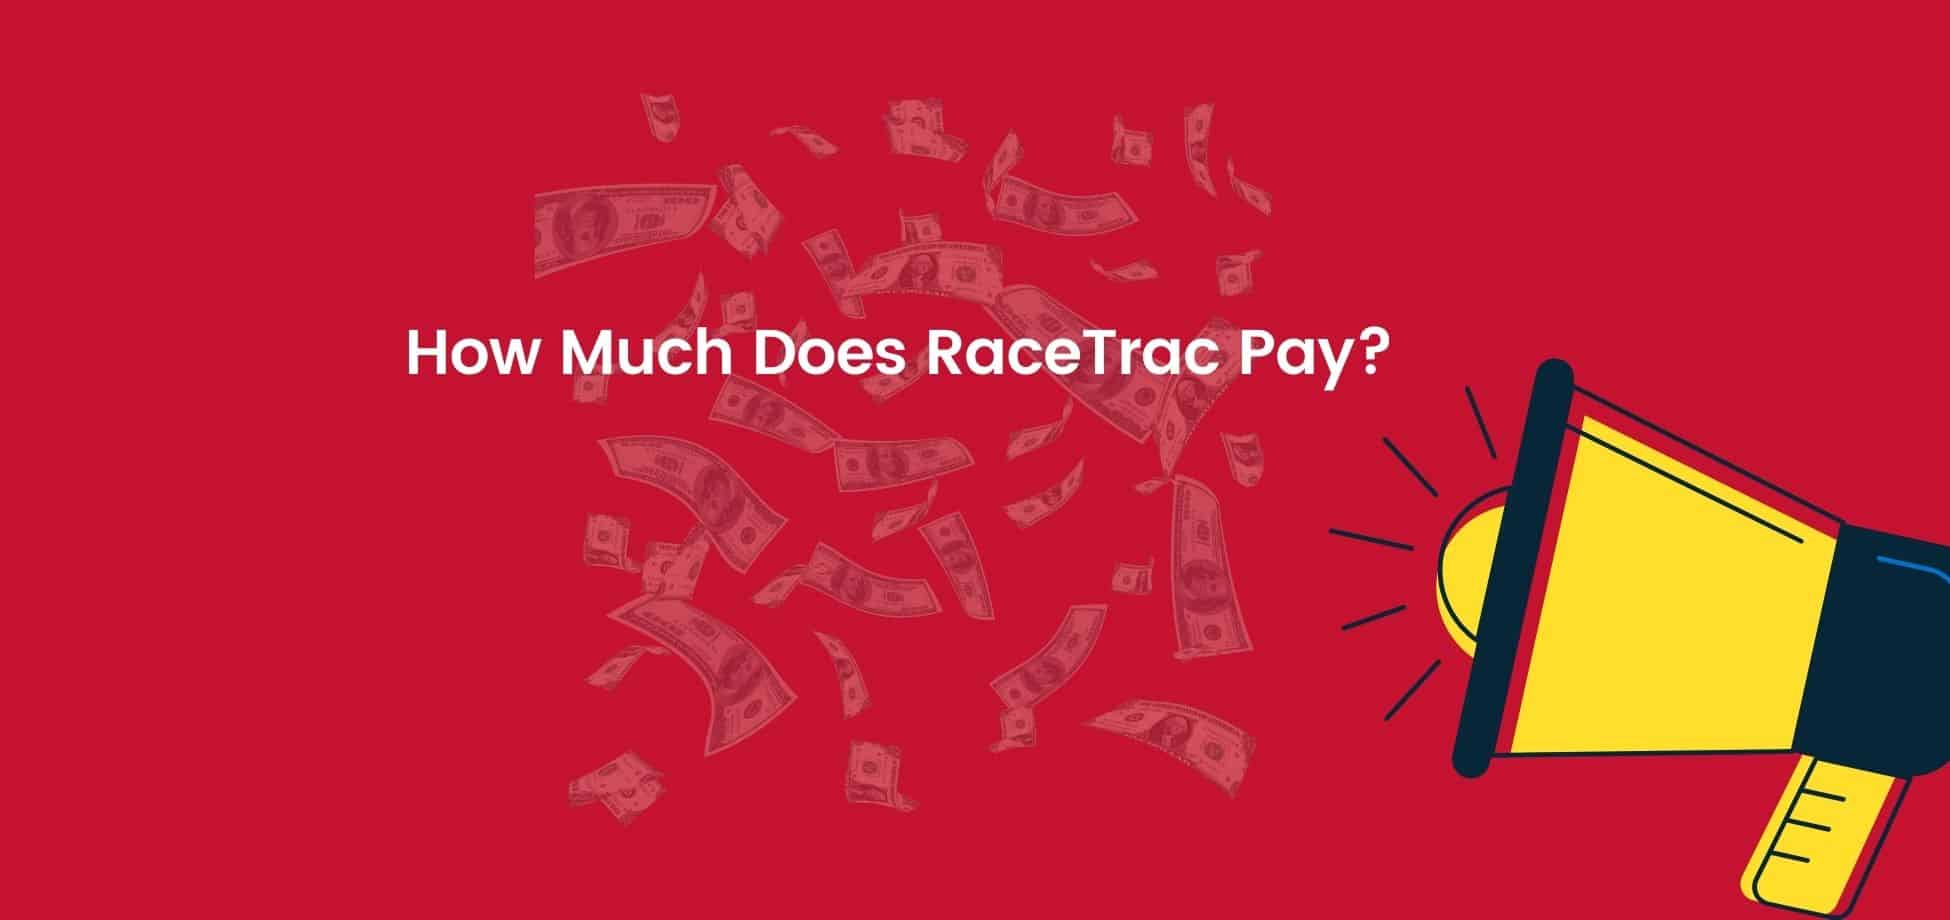 The RaceTrac hourly pay is consistent and competitive in its industry.